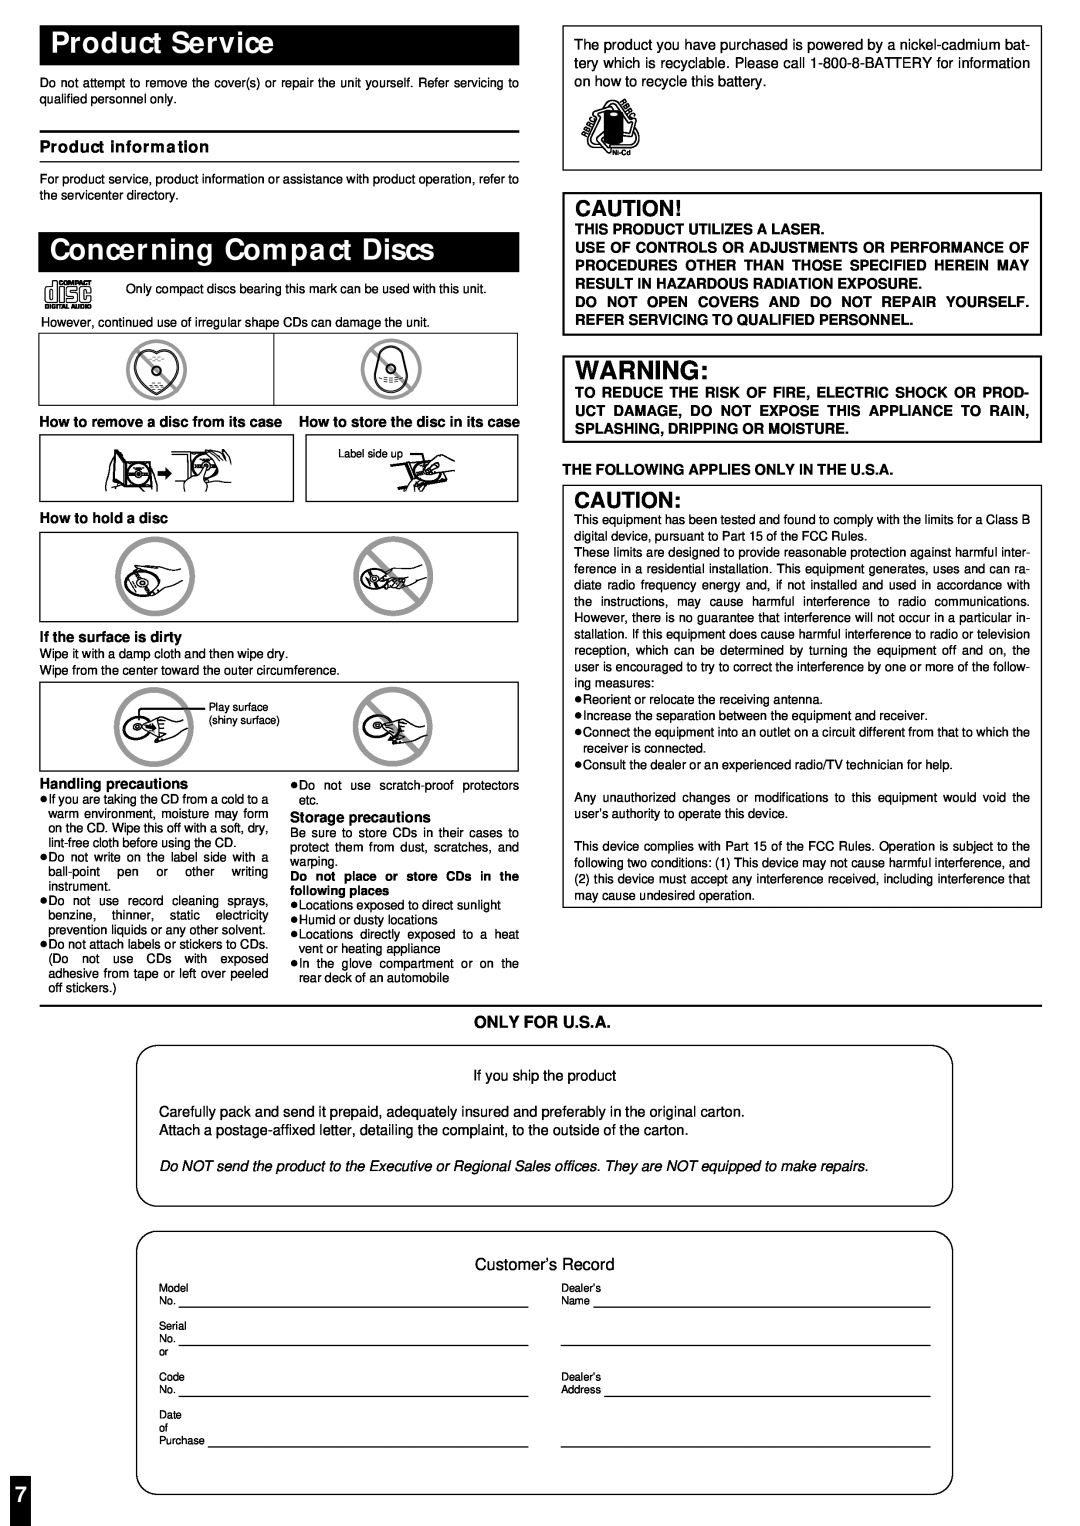 Panasonic SL-SW895 Product Service, Concerning Compact Discs, Product information, Only For U.S.A, Customer’s Record 